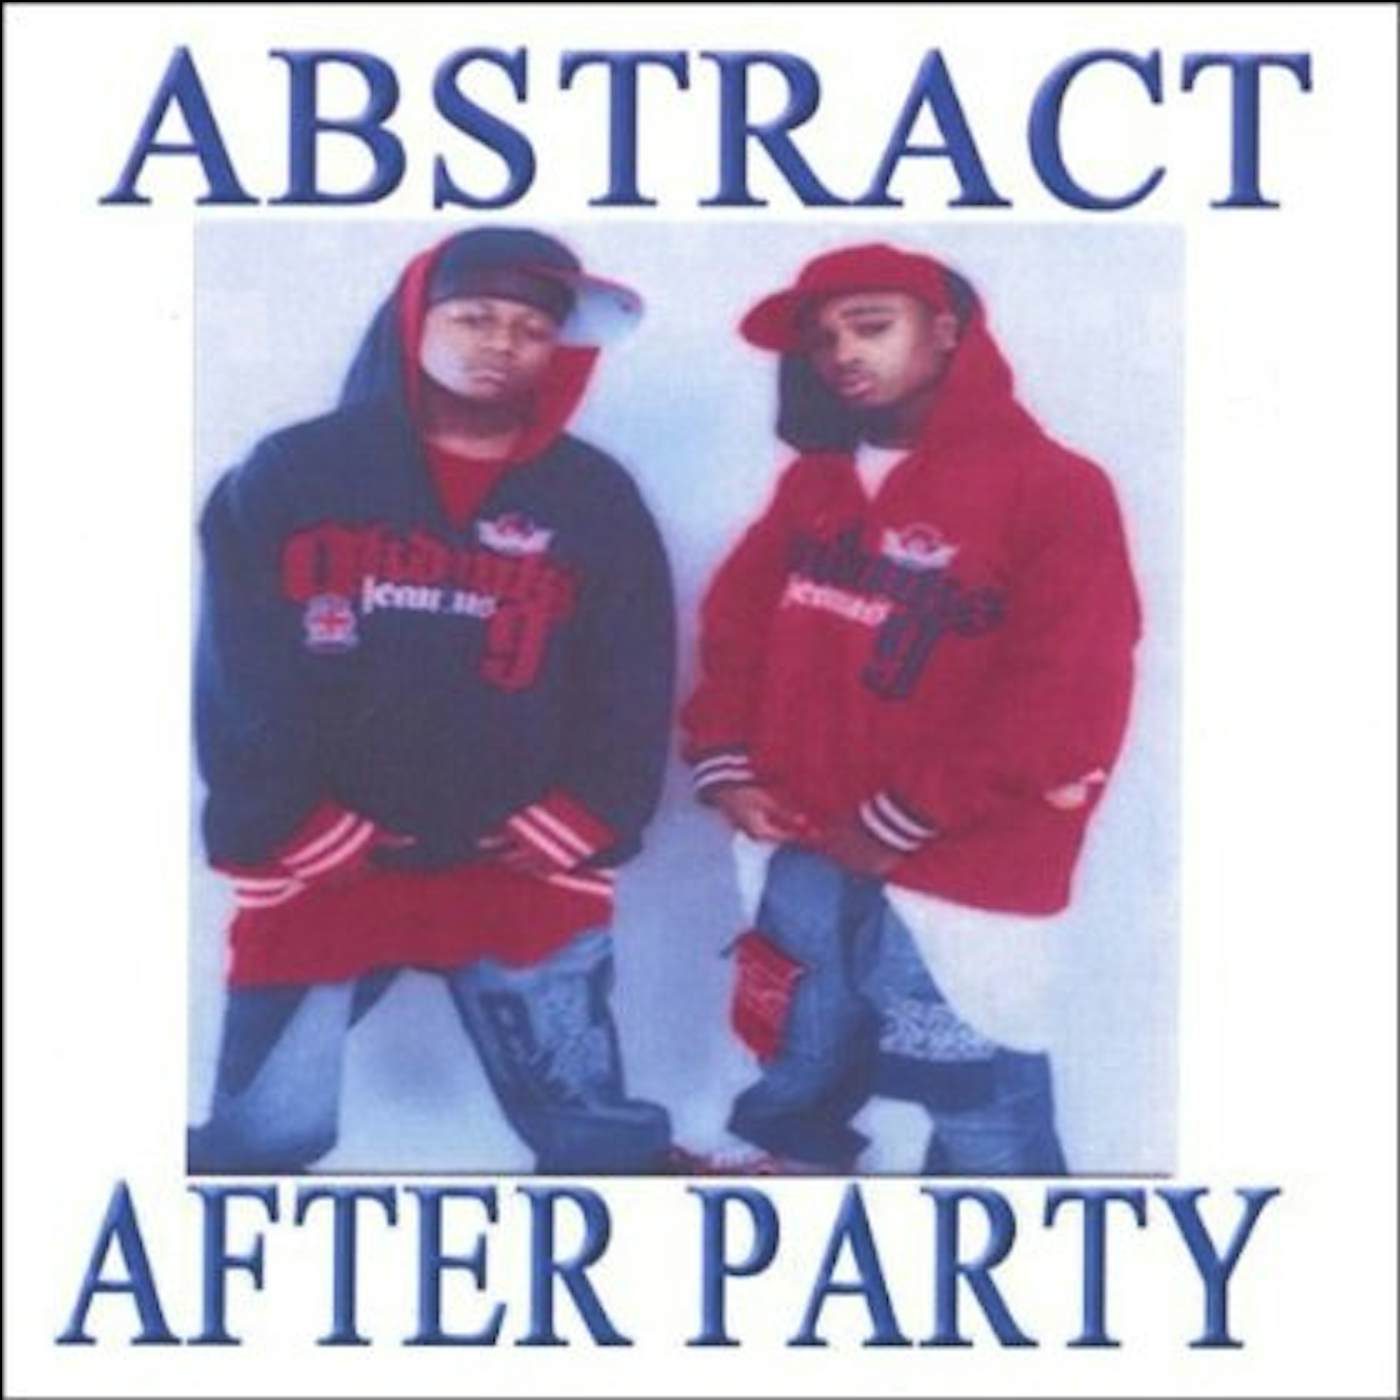 Abstract AFTER PARTY CD